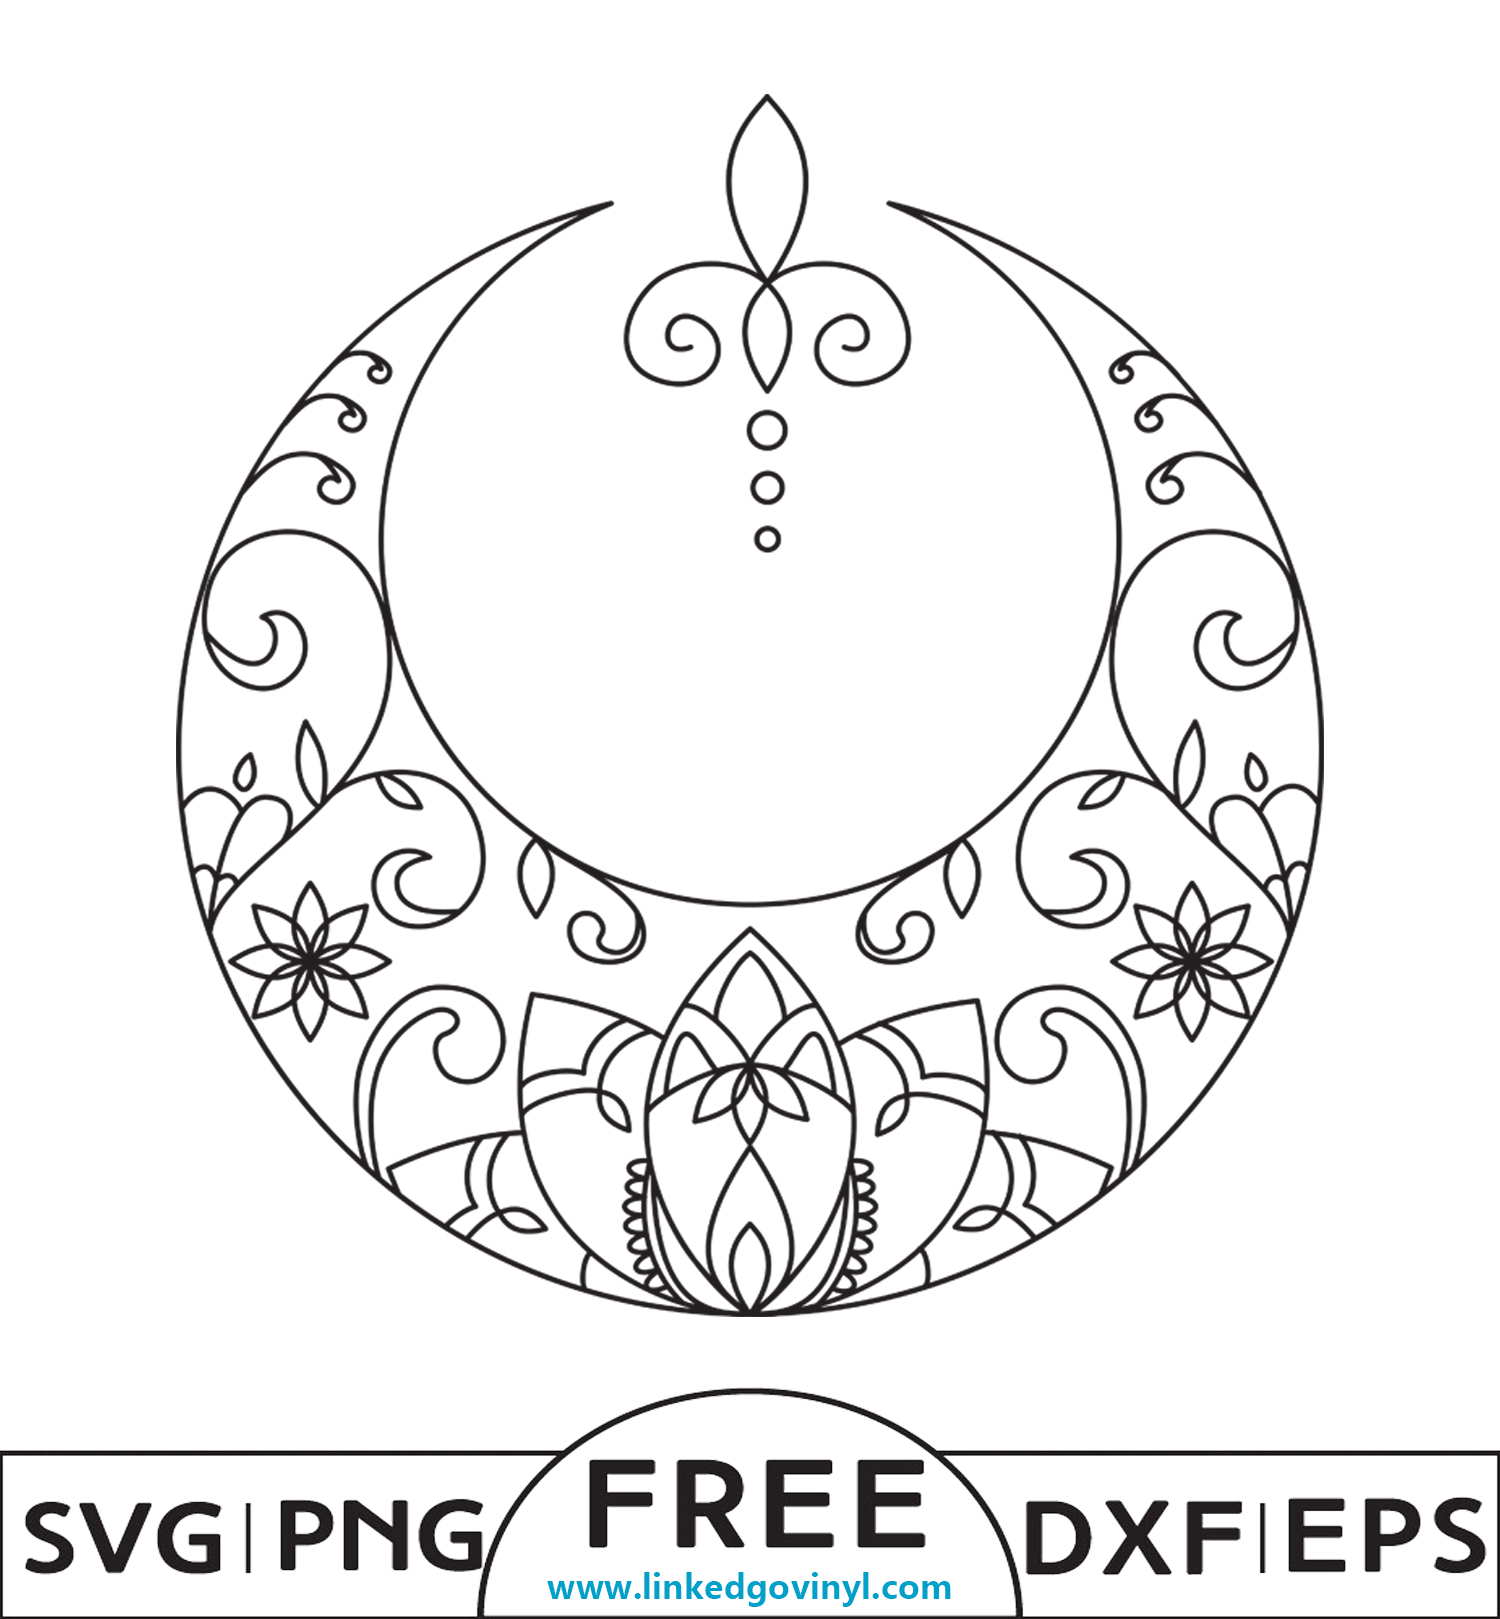 Download New Age Svg Spiritual Tarot Card Svg Png Template Mystical Svg Spiritual Svg Witchy Svg Celestial Butterfly Moth Svg Moon And Starts Svg Clip Art Art Collectibles